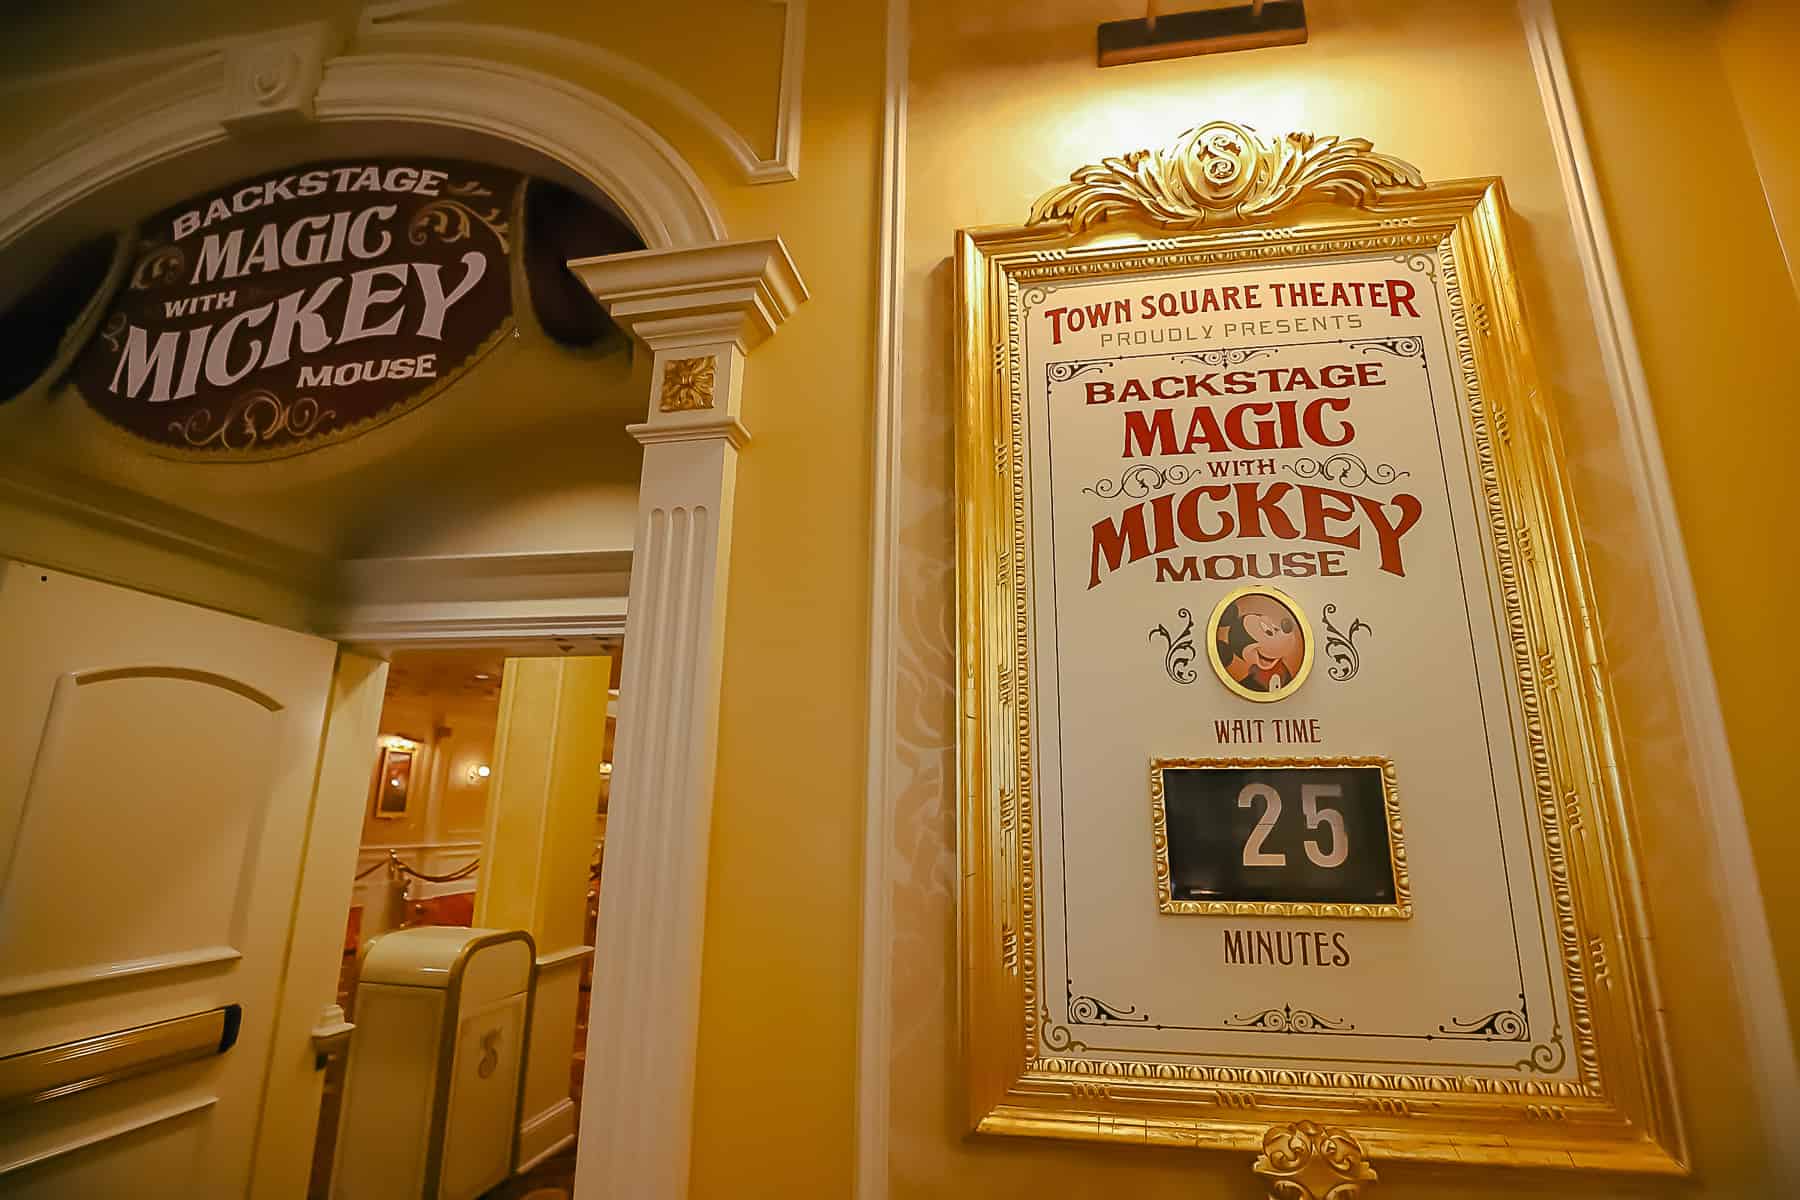 shows a posted 25 minute wait to meet Mickey Mouse during our visit 